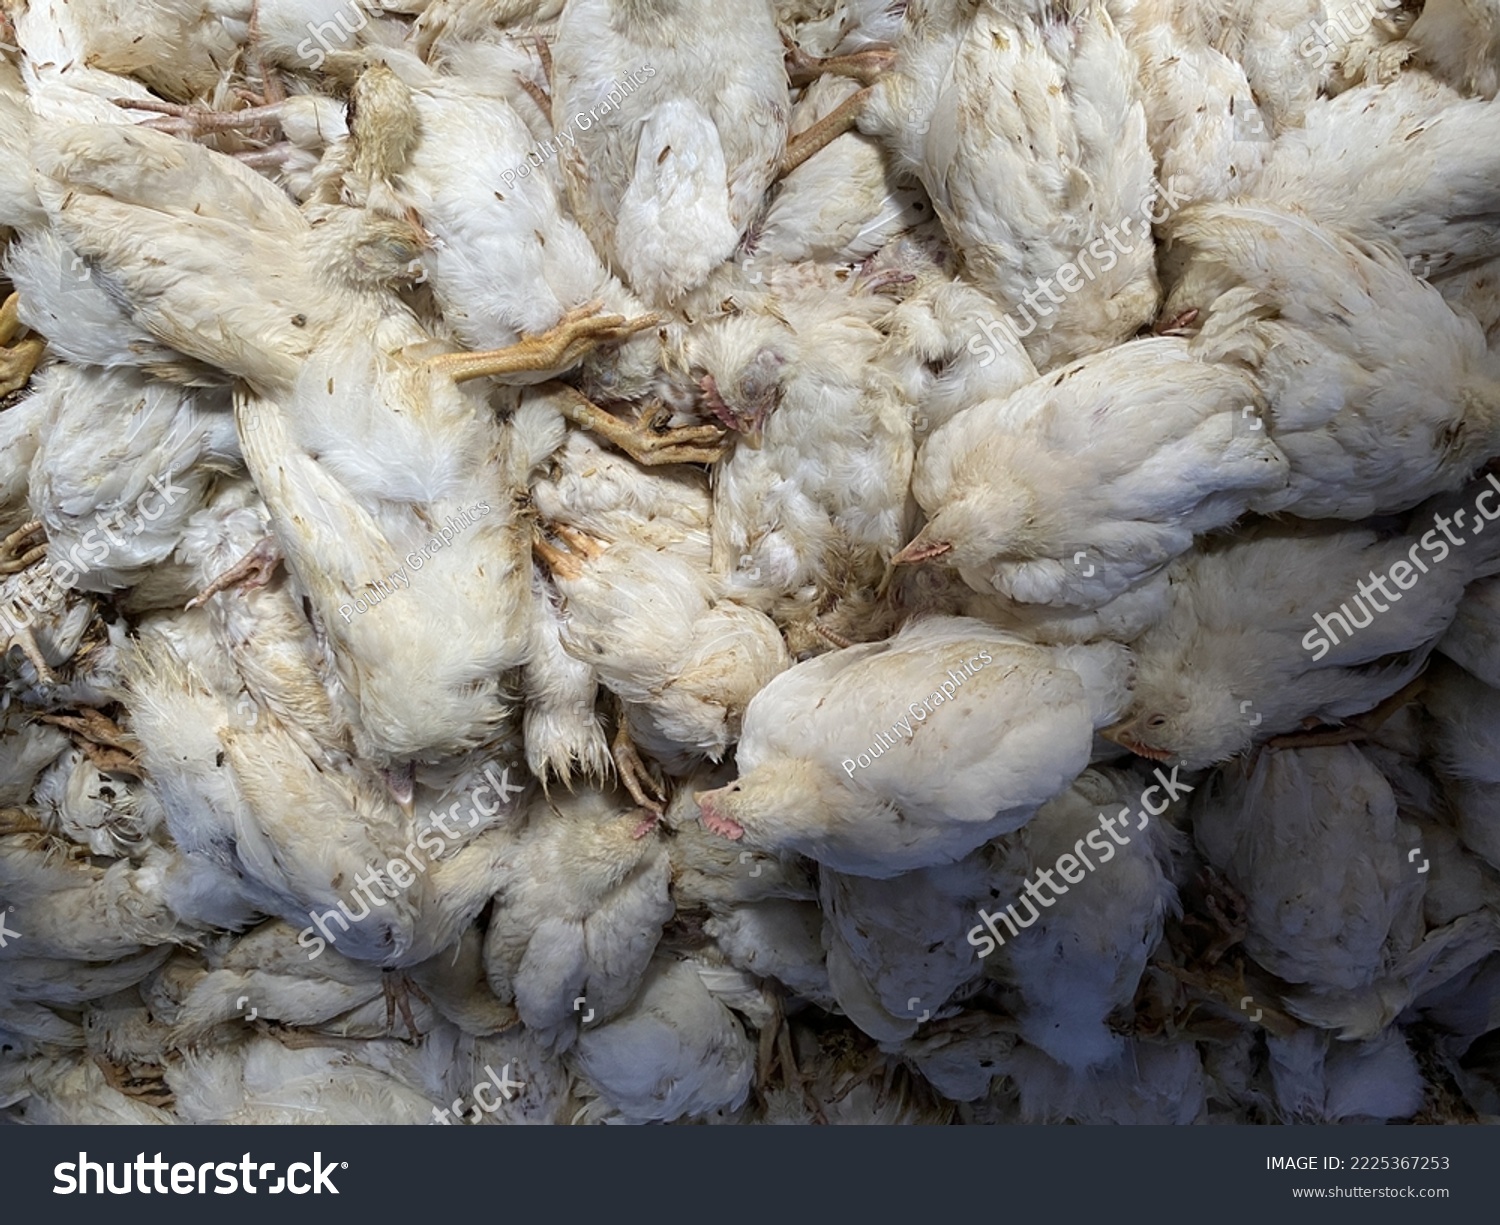 Poultry Disease Outbreaks, Avian Influenza in Chickens, Image for Chicken health isuess.  #2225367253